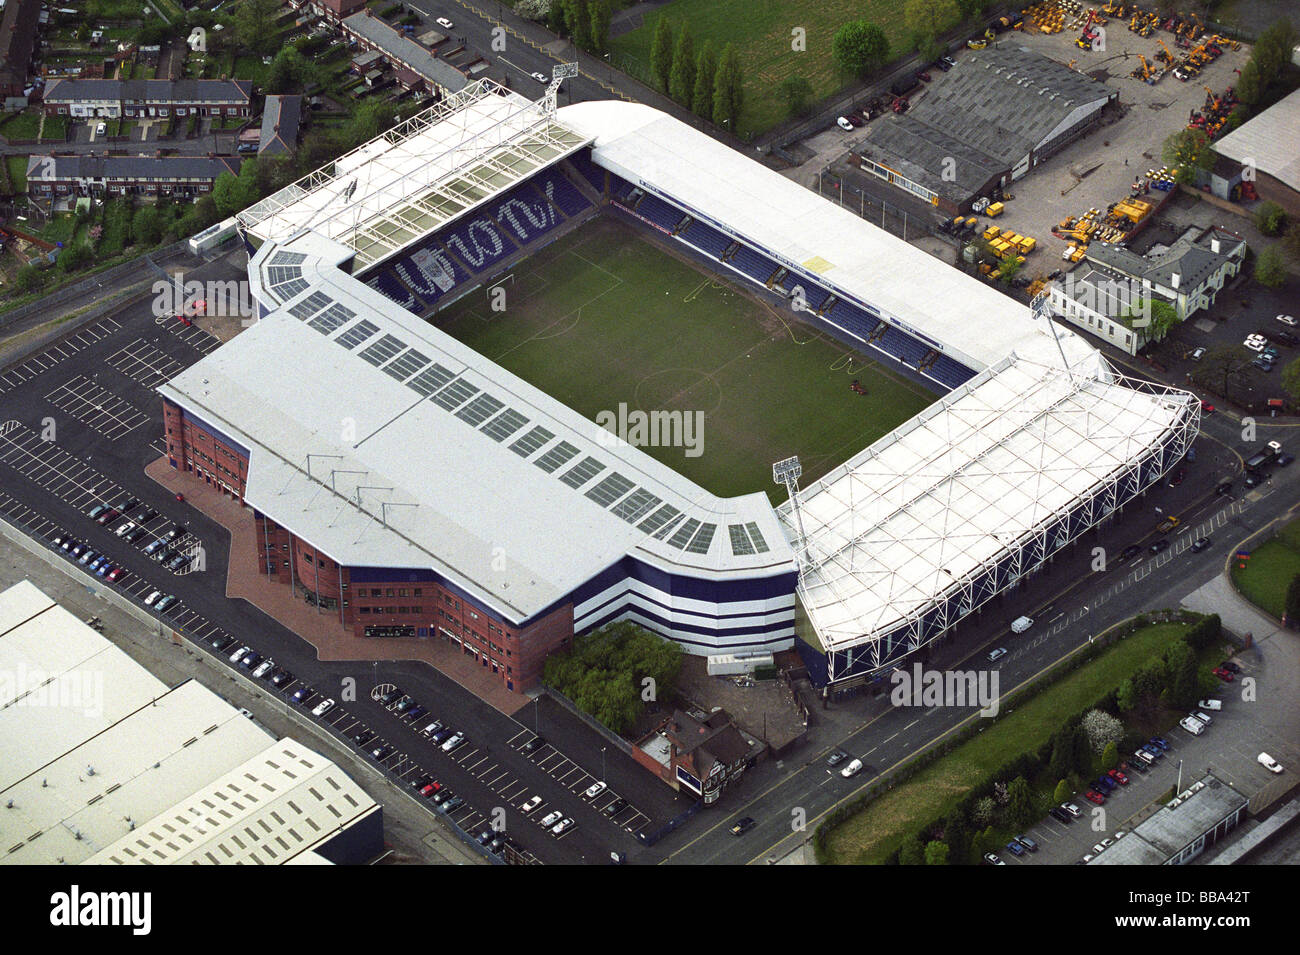 aerial-view-of-the-hawthorns-home-of-west-bromwich-albion-football-BBA42T.jpg